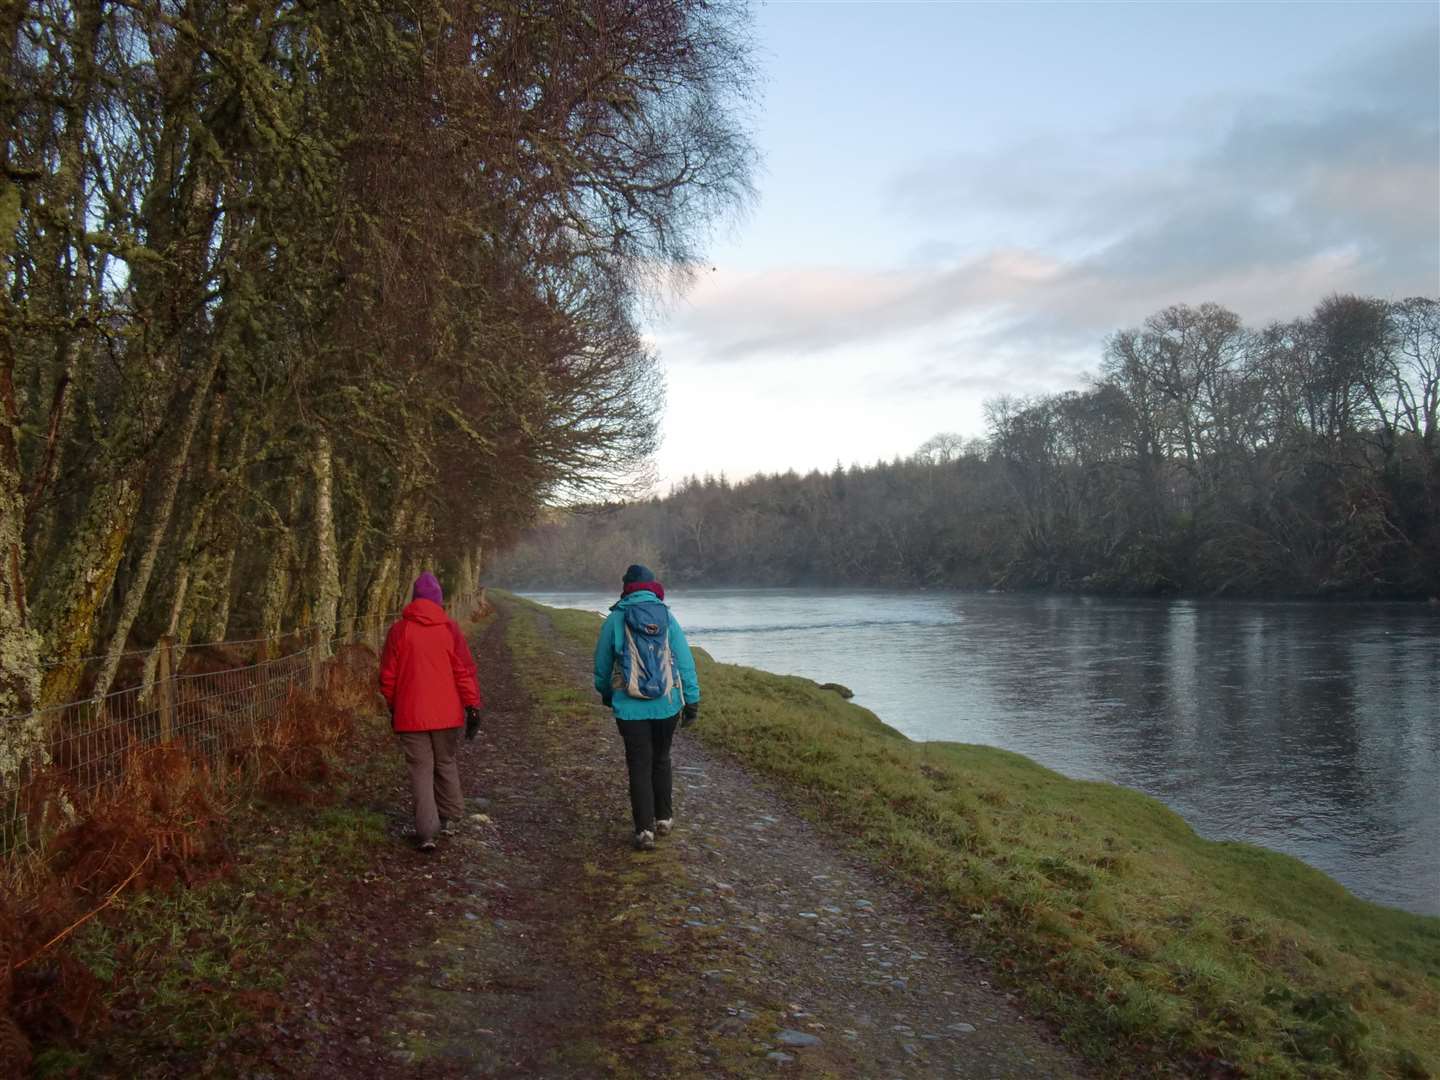 Easy going along the riverside towards Beauly.